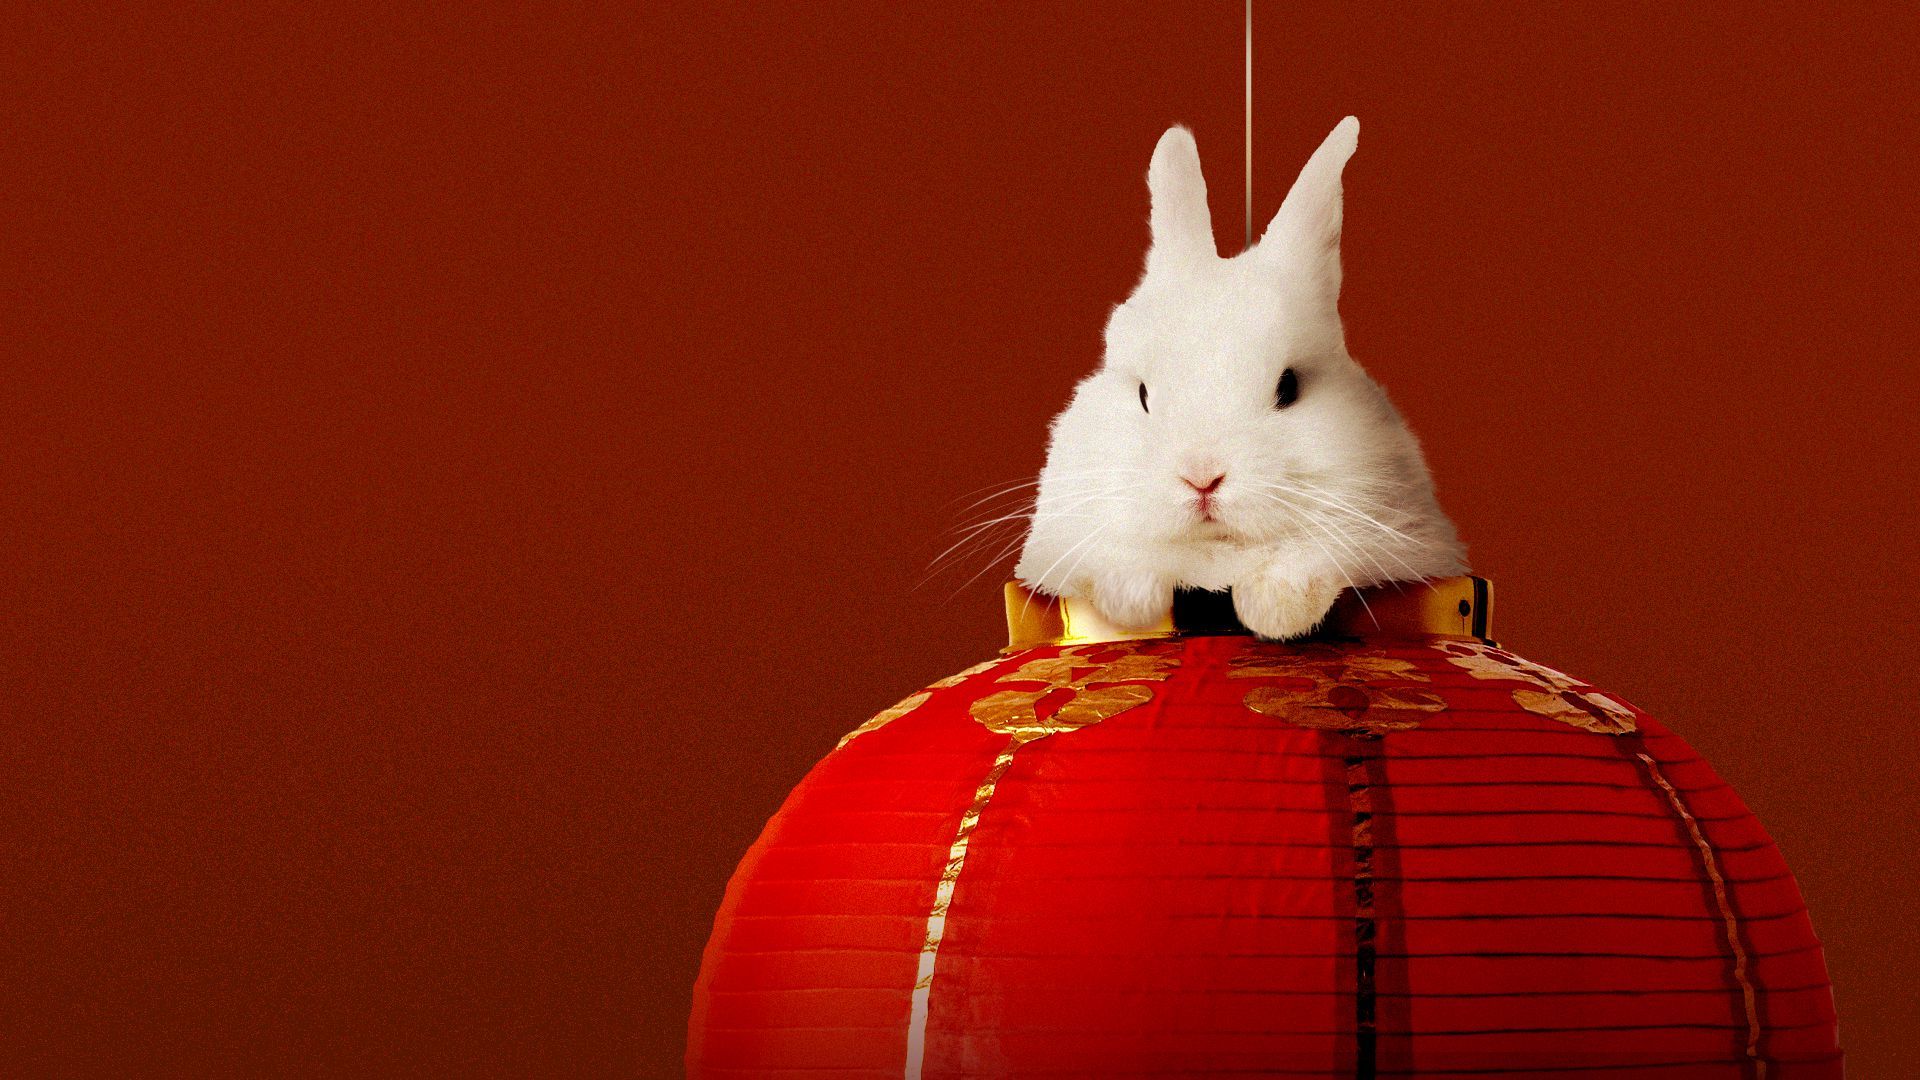 Illustration of a rabbit peeking out from a red paper lantern. 